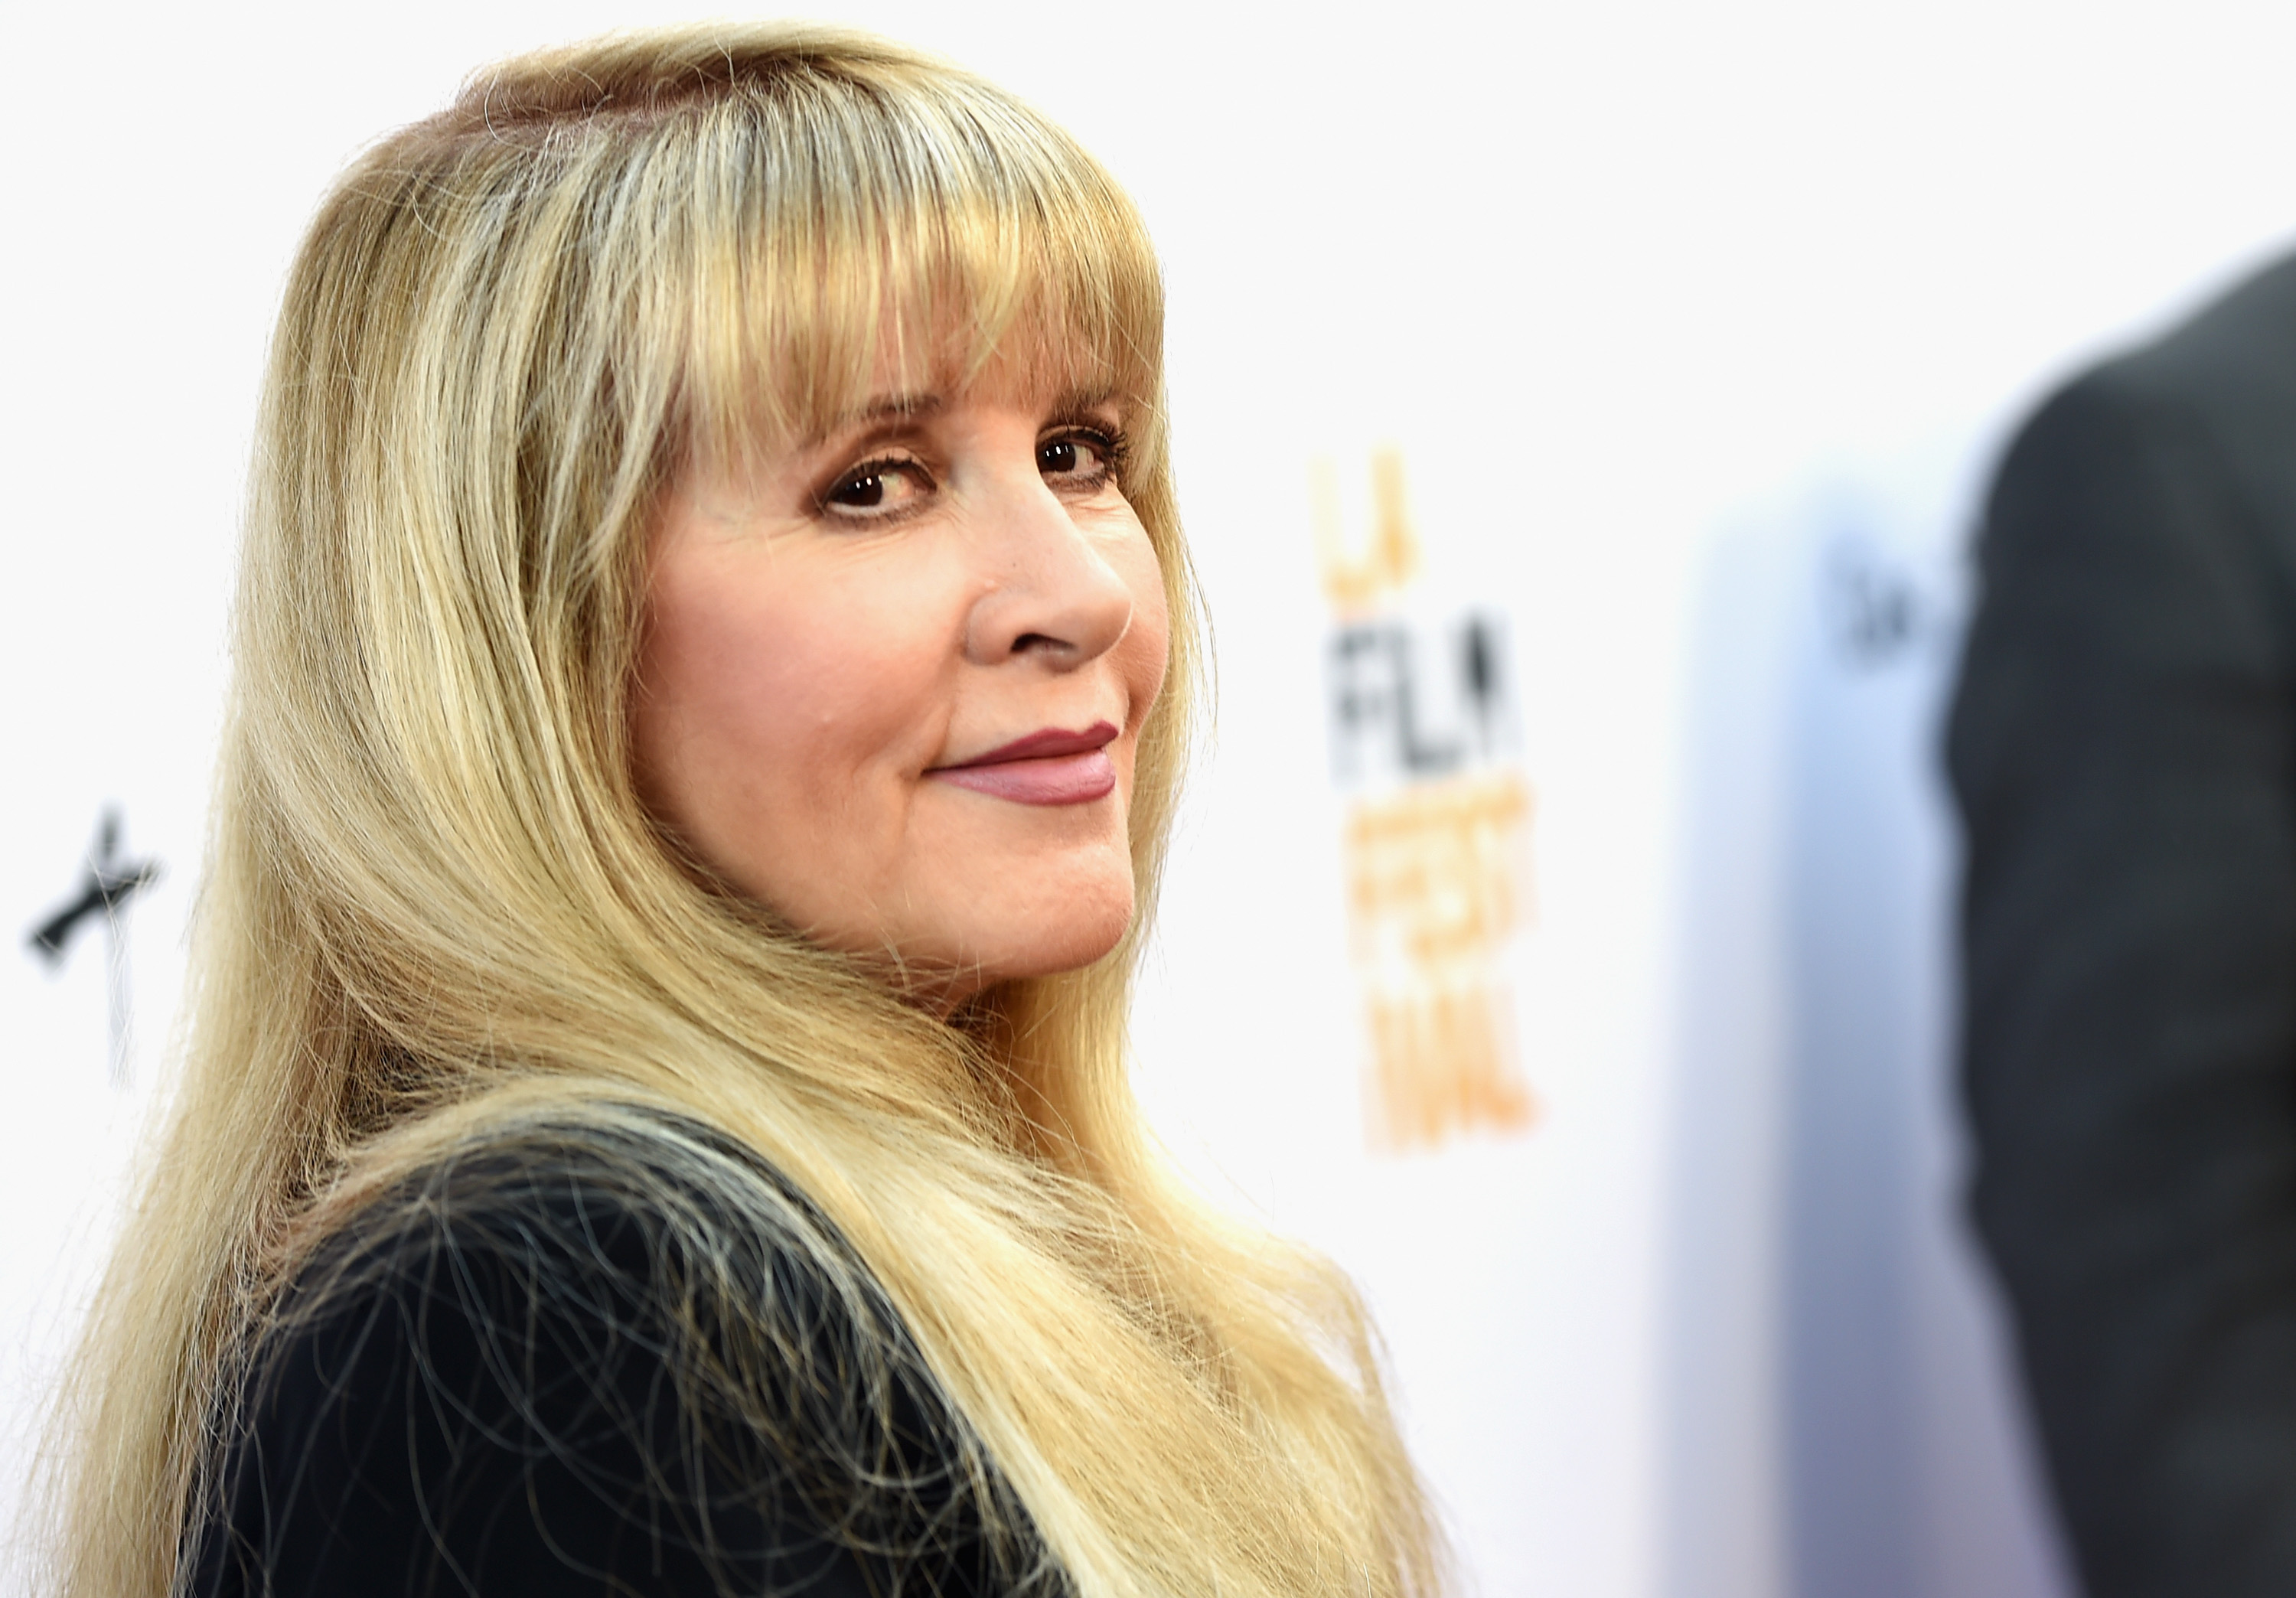 Stevie Nicks wears a black shirt and stands in front of the white background.